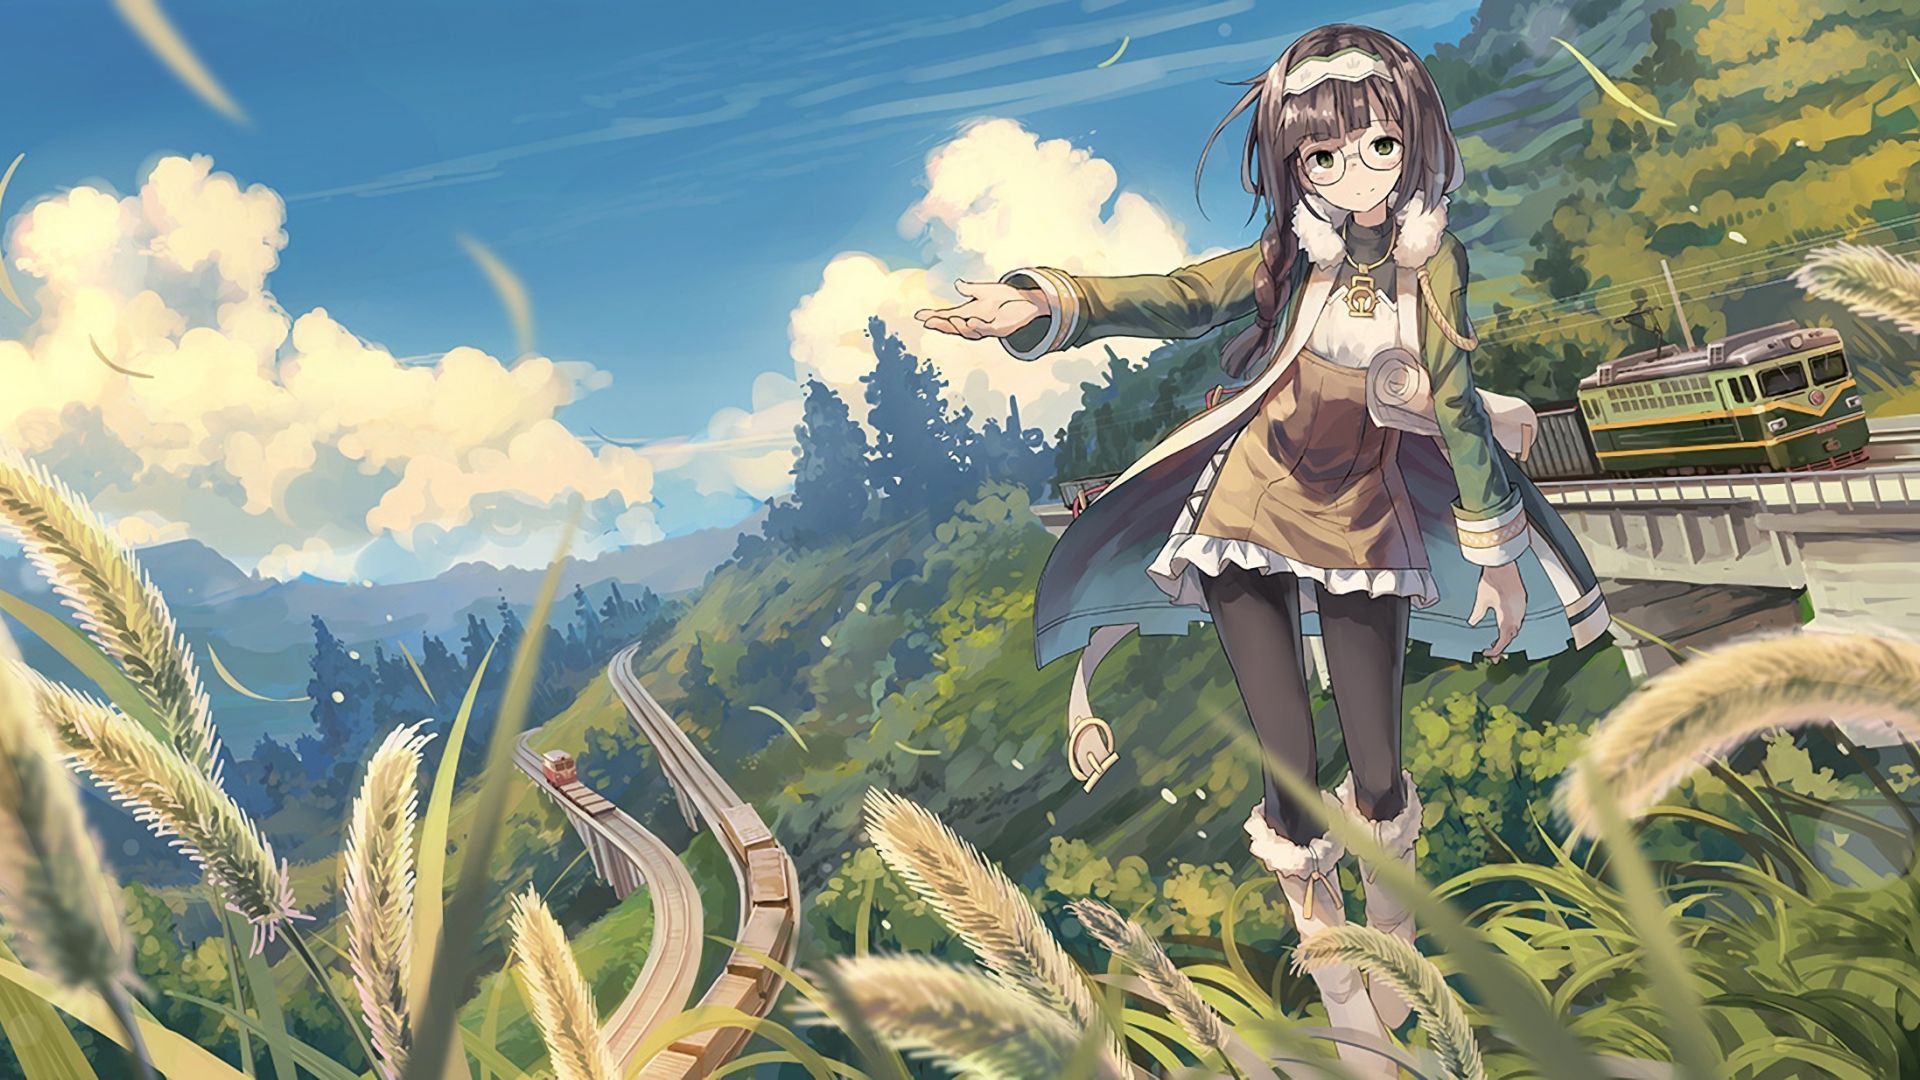 Desktop Wallpaper Ponytail, Long Hair, Anime Girl, Outdoor, HD Image, Picture, Background, 027d48